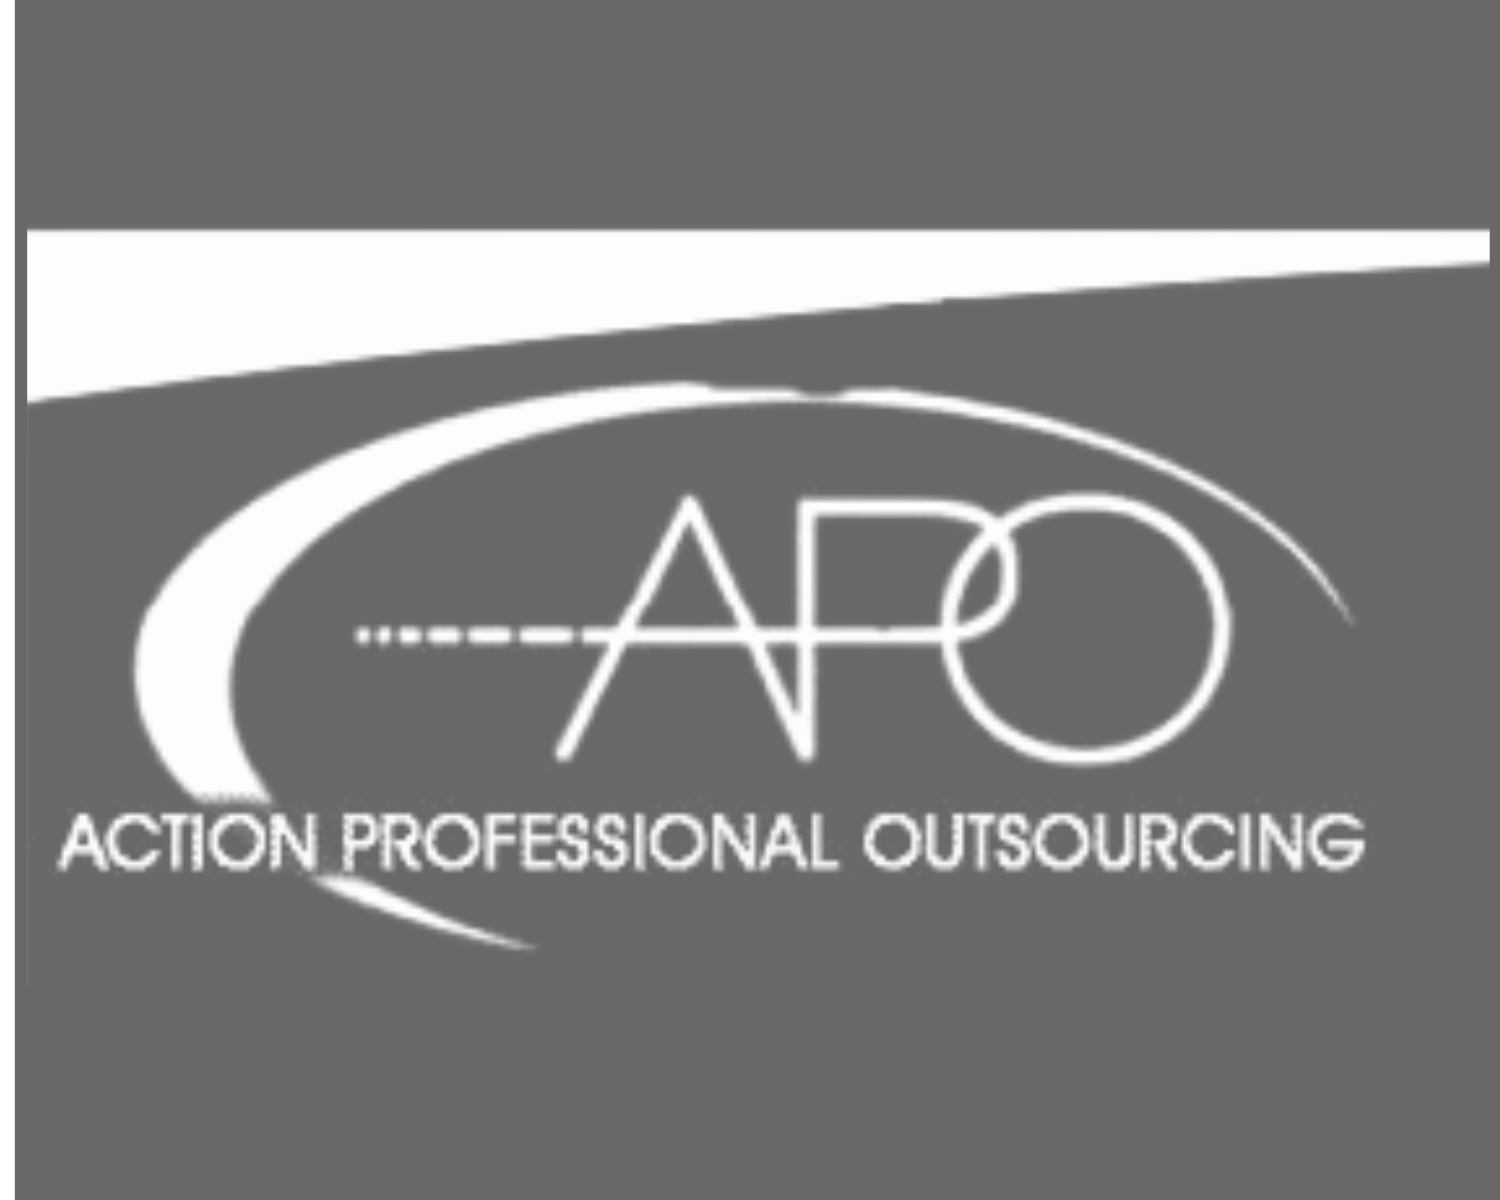 Action Professional Outsourcing